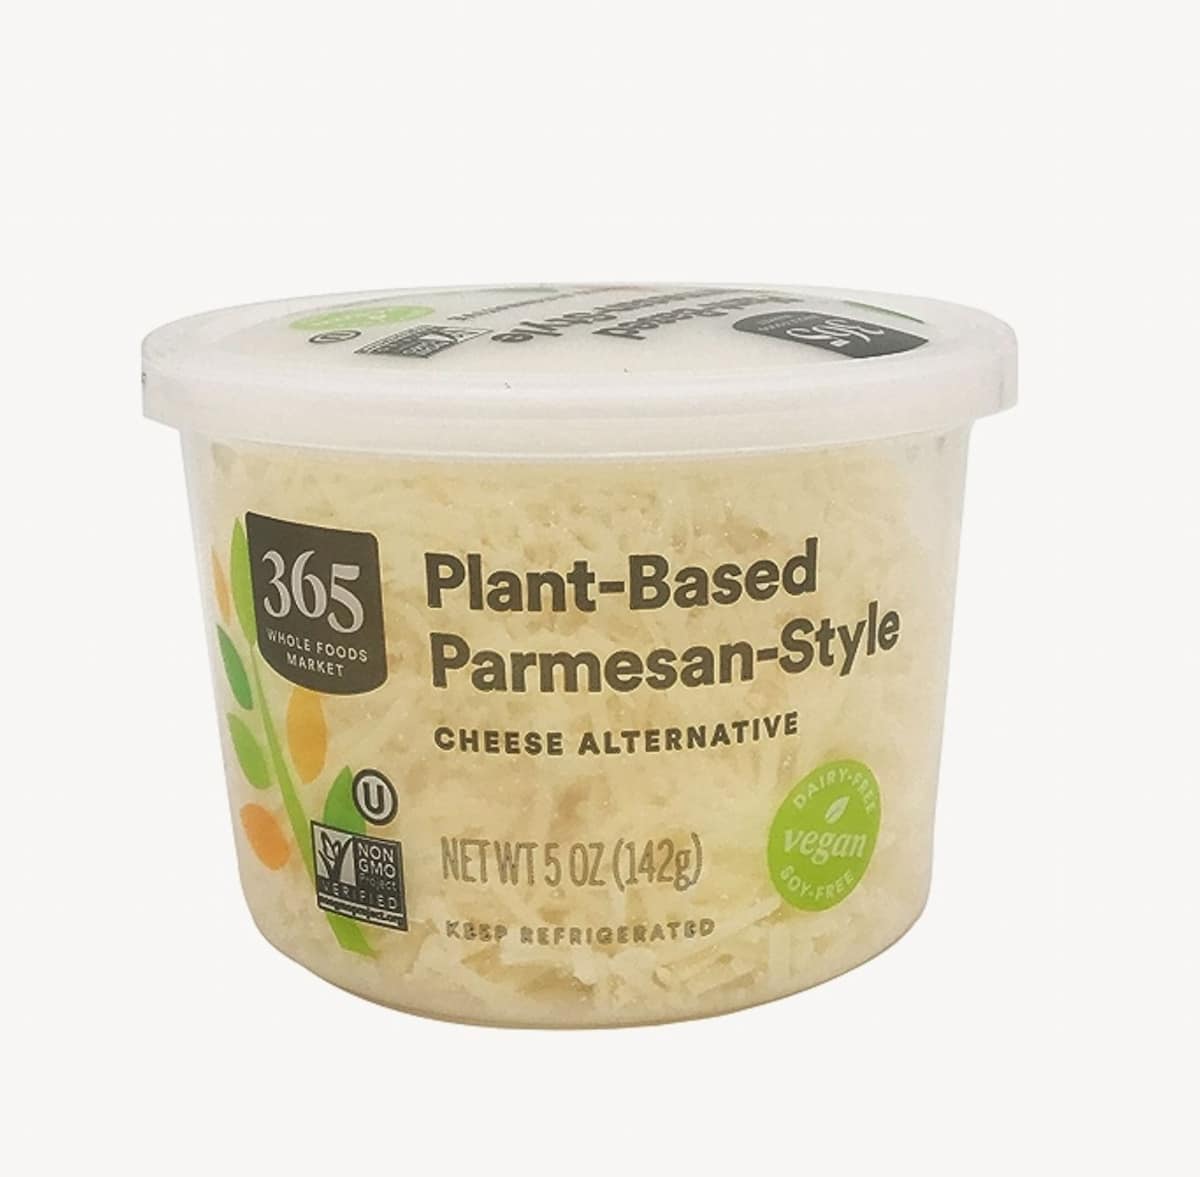 A container of 365 Whole Foods Market brand plant-based, parmesan-style cheese.